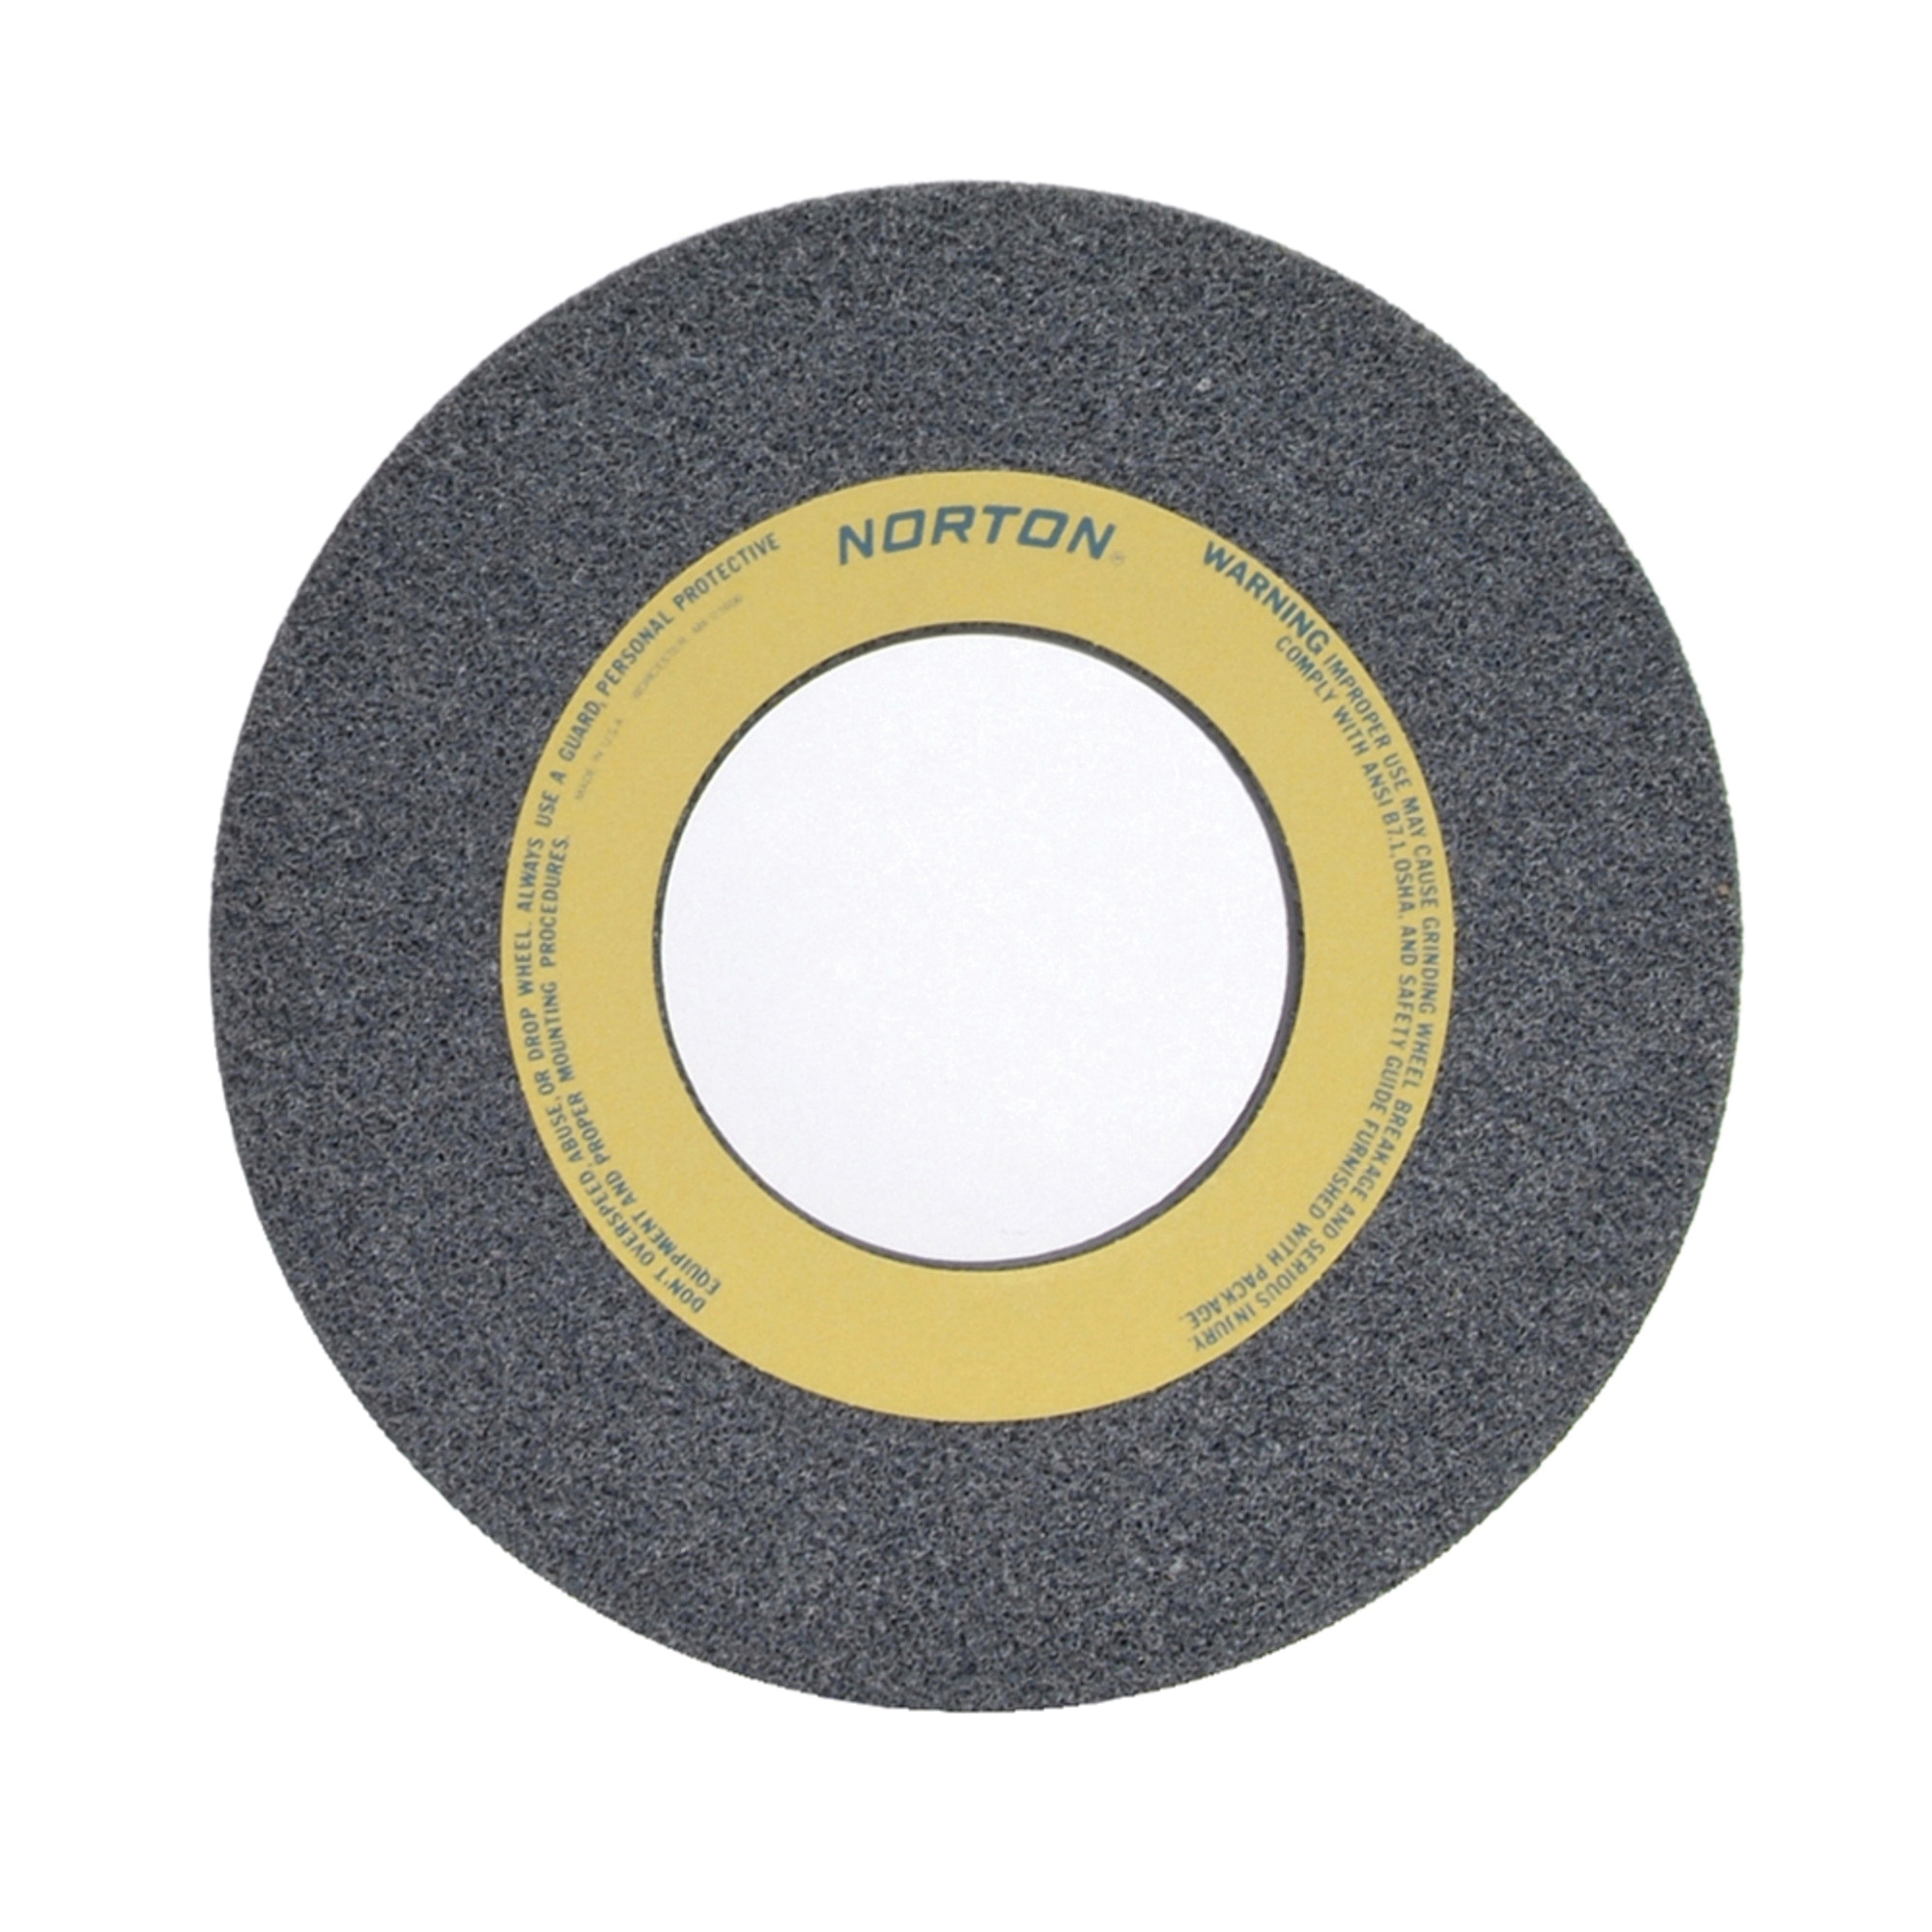 Norton® 66253364340 32A Straight Toolroom Wheel, 14 in Dia x 1-1/2 in THK, 5 in Center Hole, 60 Grit, Aluminum Oxide Abrasive